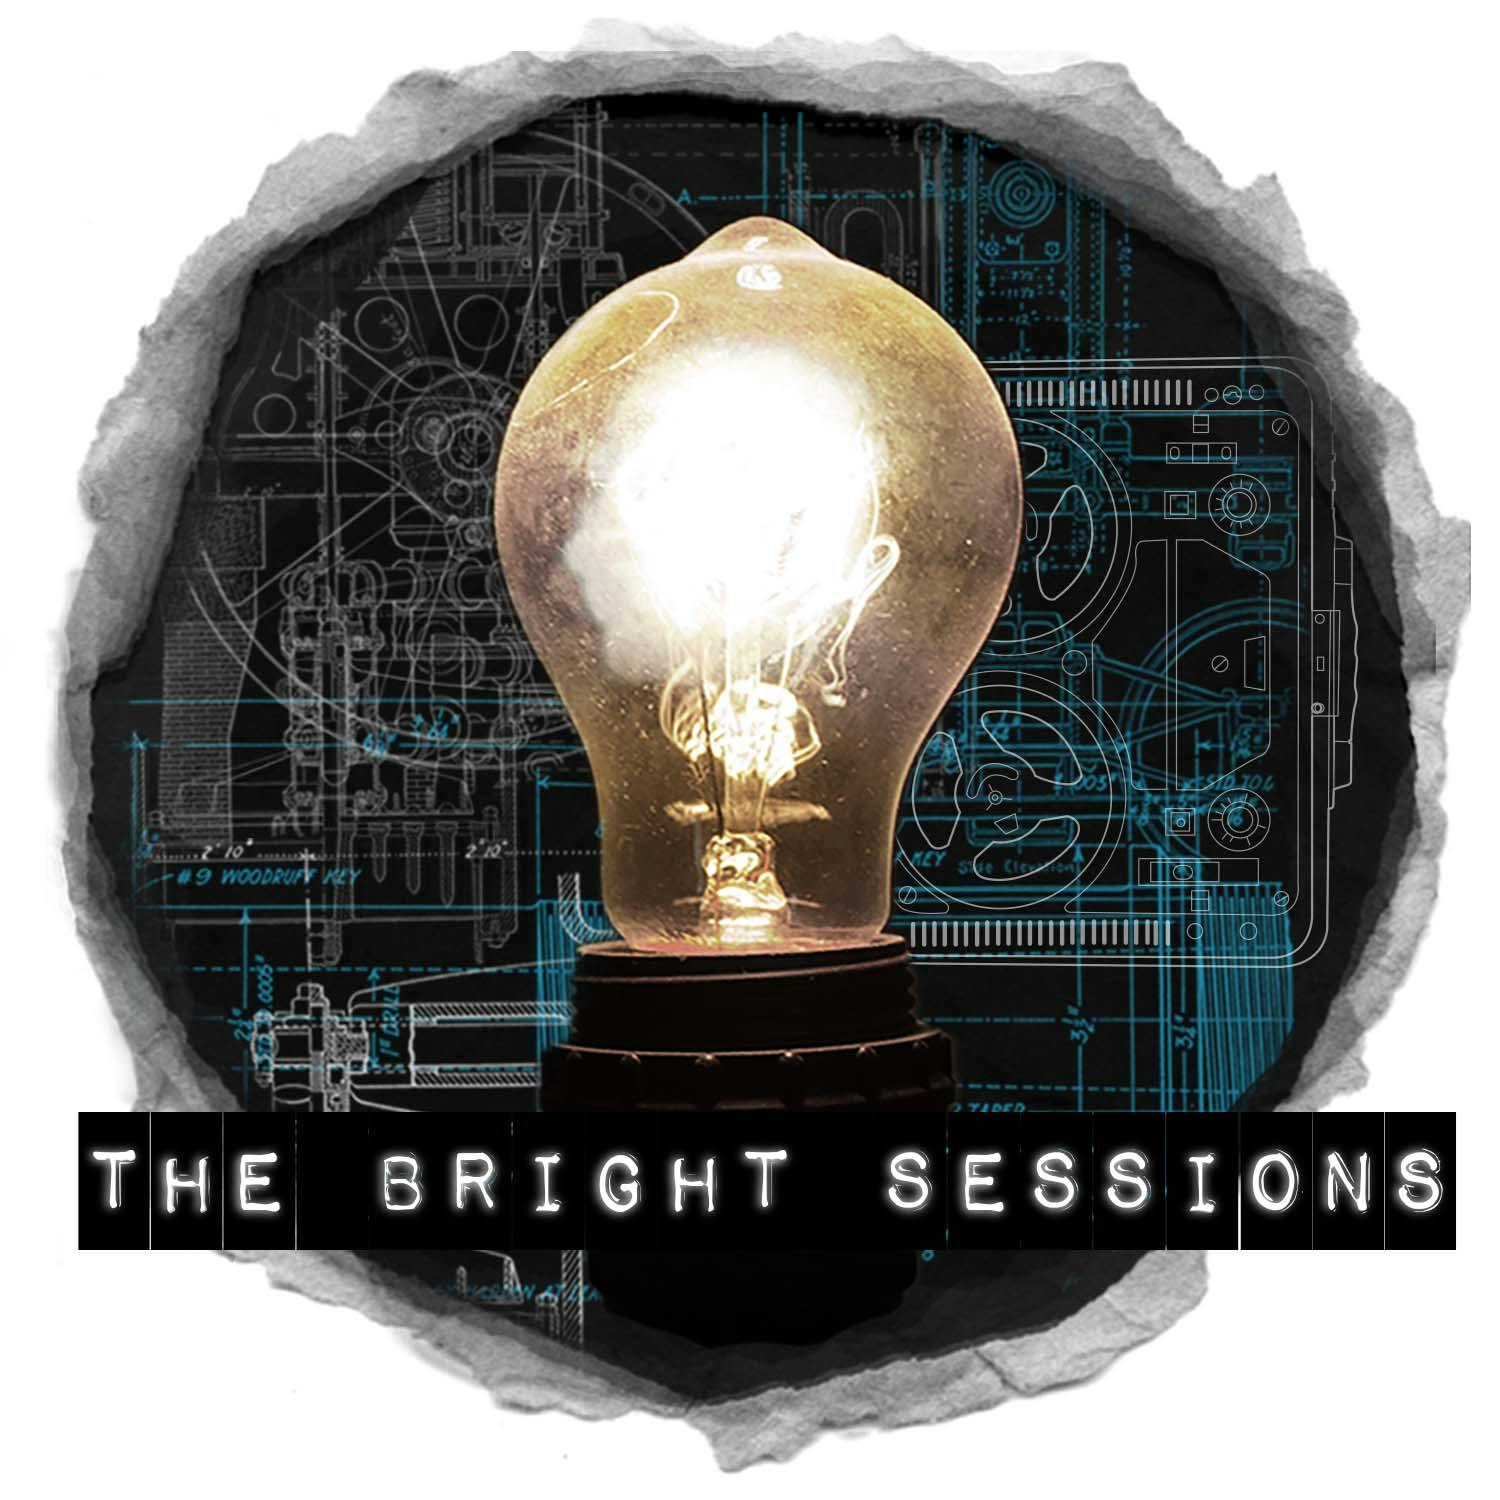 The Bright Sessions podcast